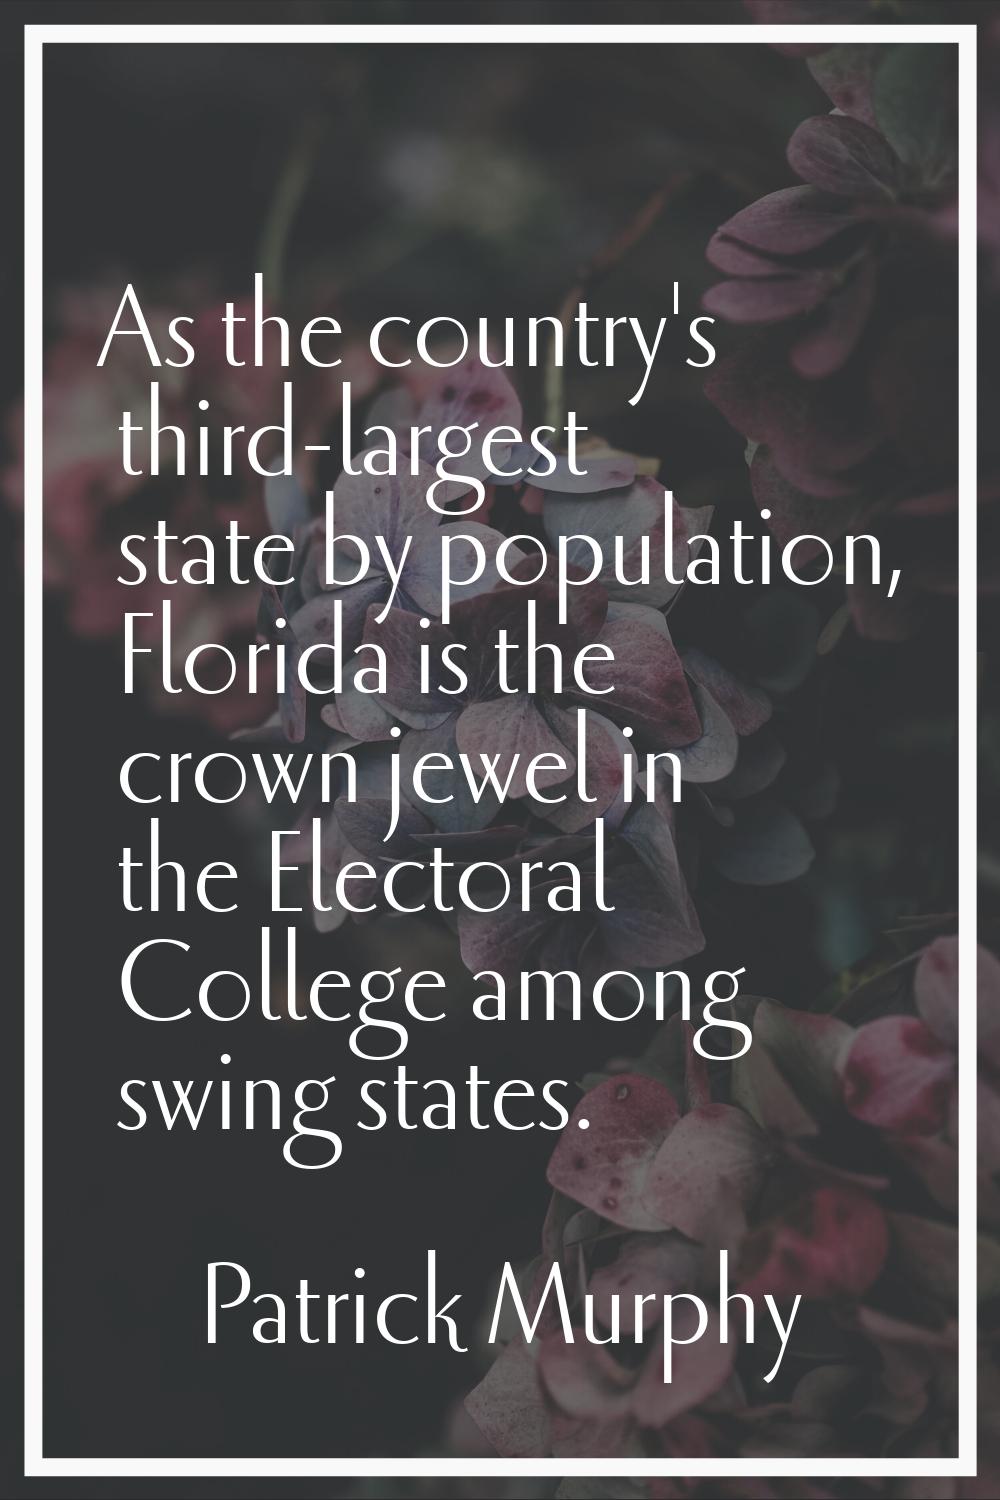 As the country's third-largest state by population, Florida is the crown jewel in the Electoral Col